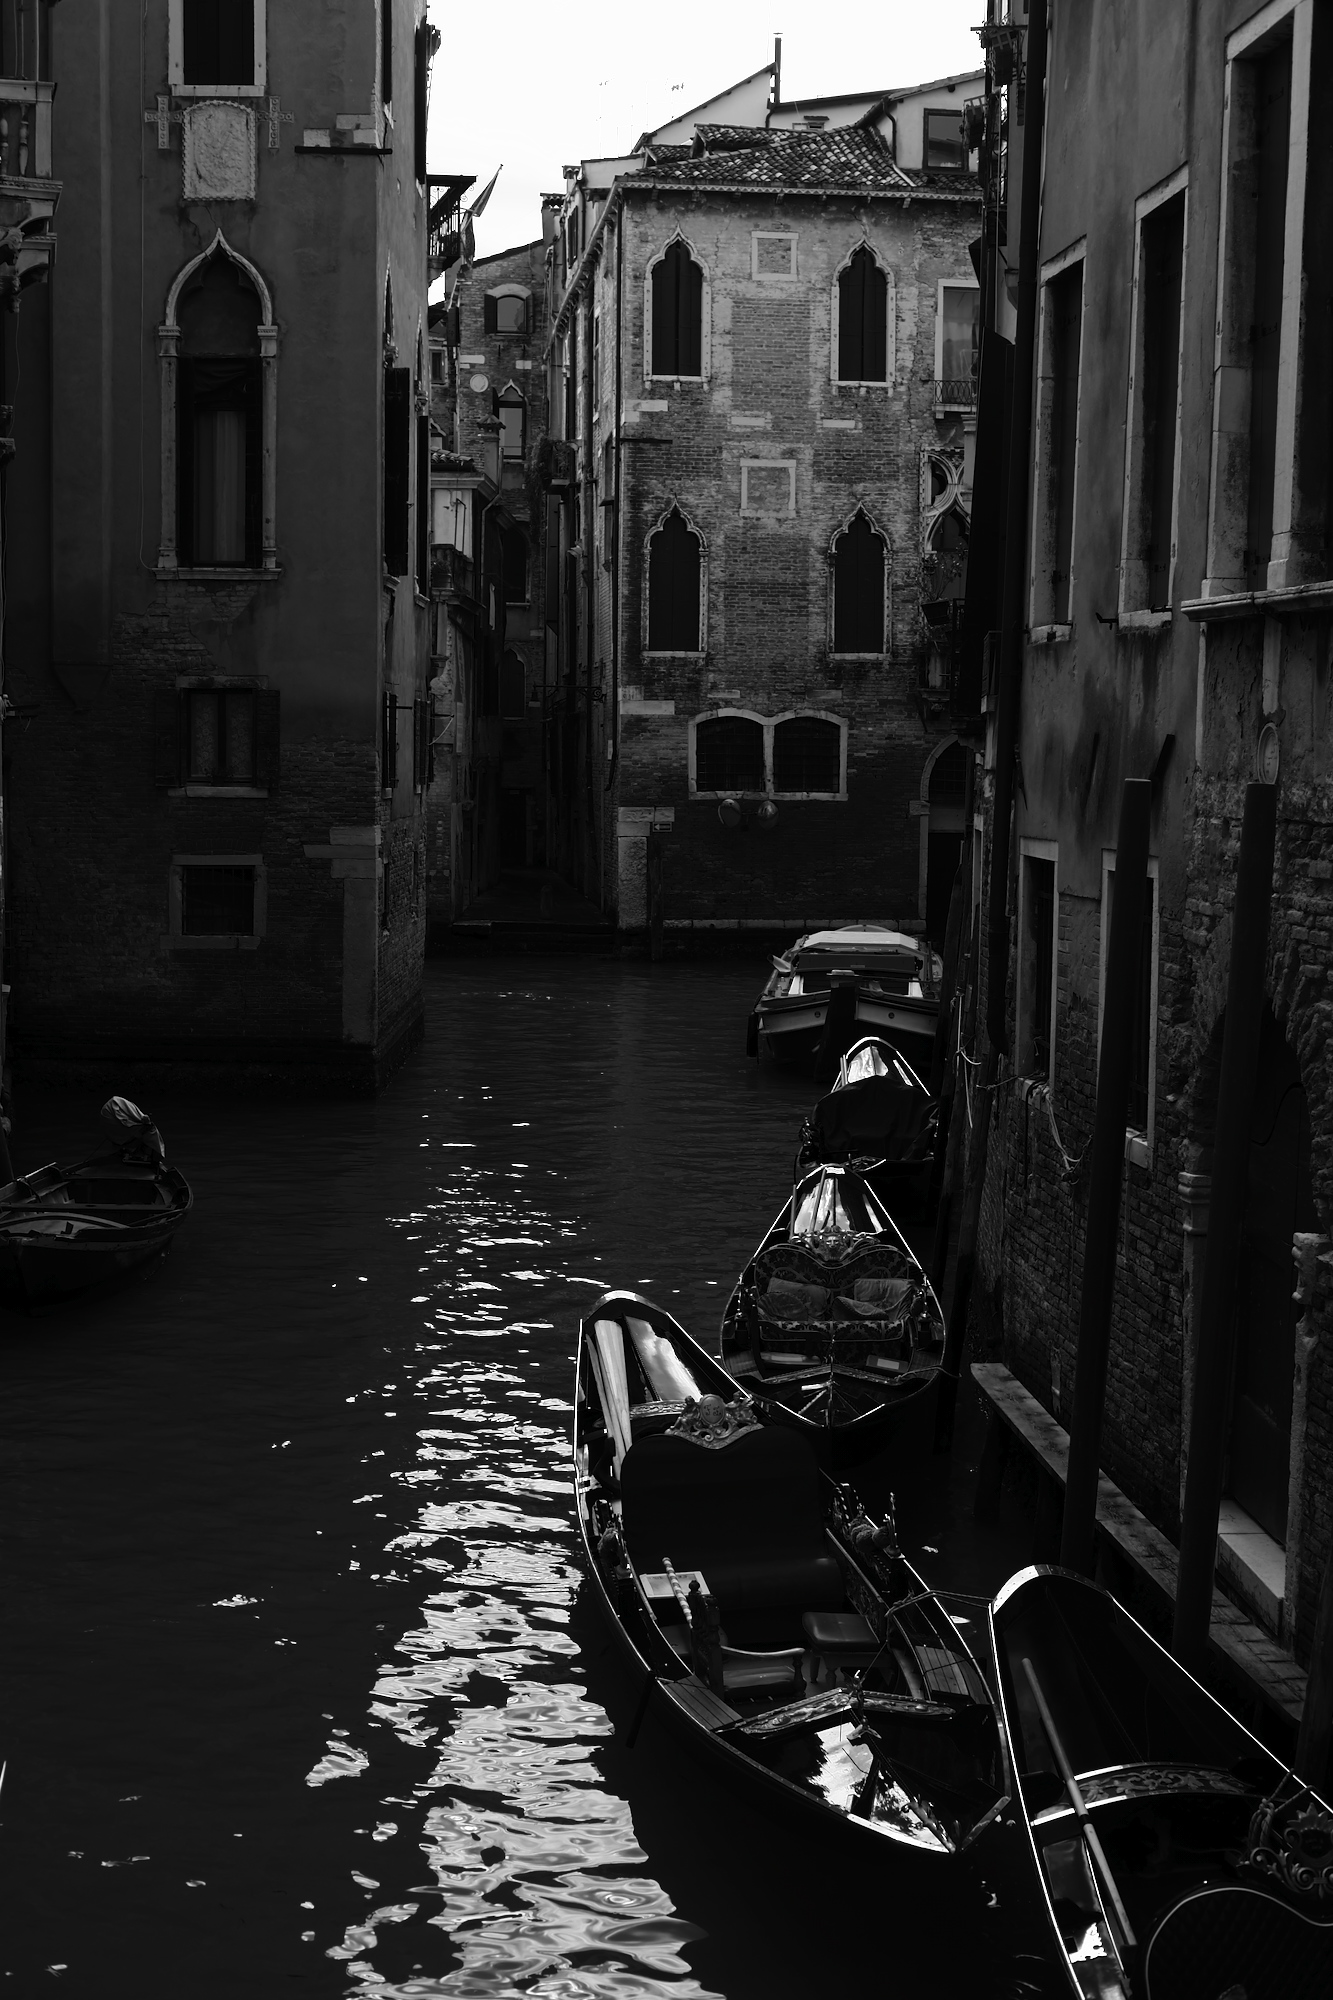 Without Venice...